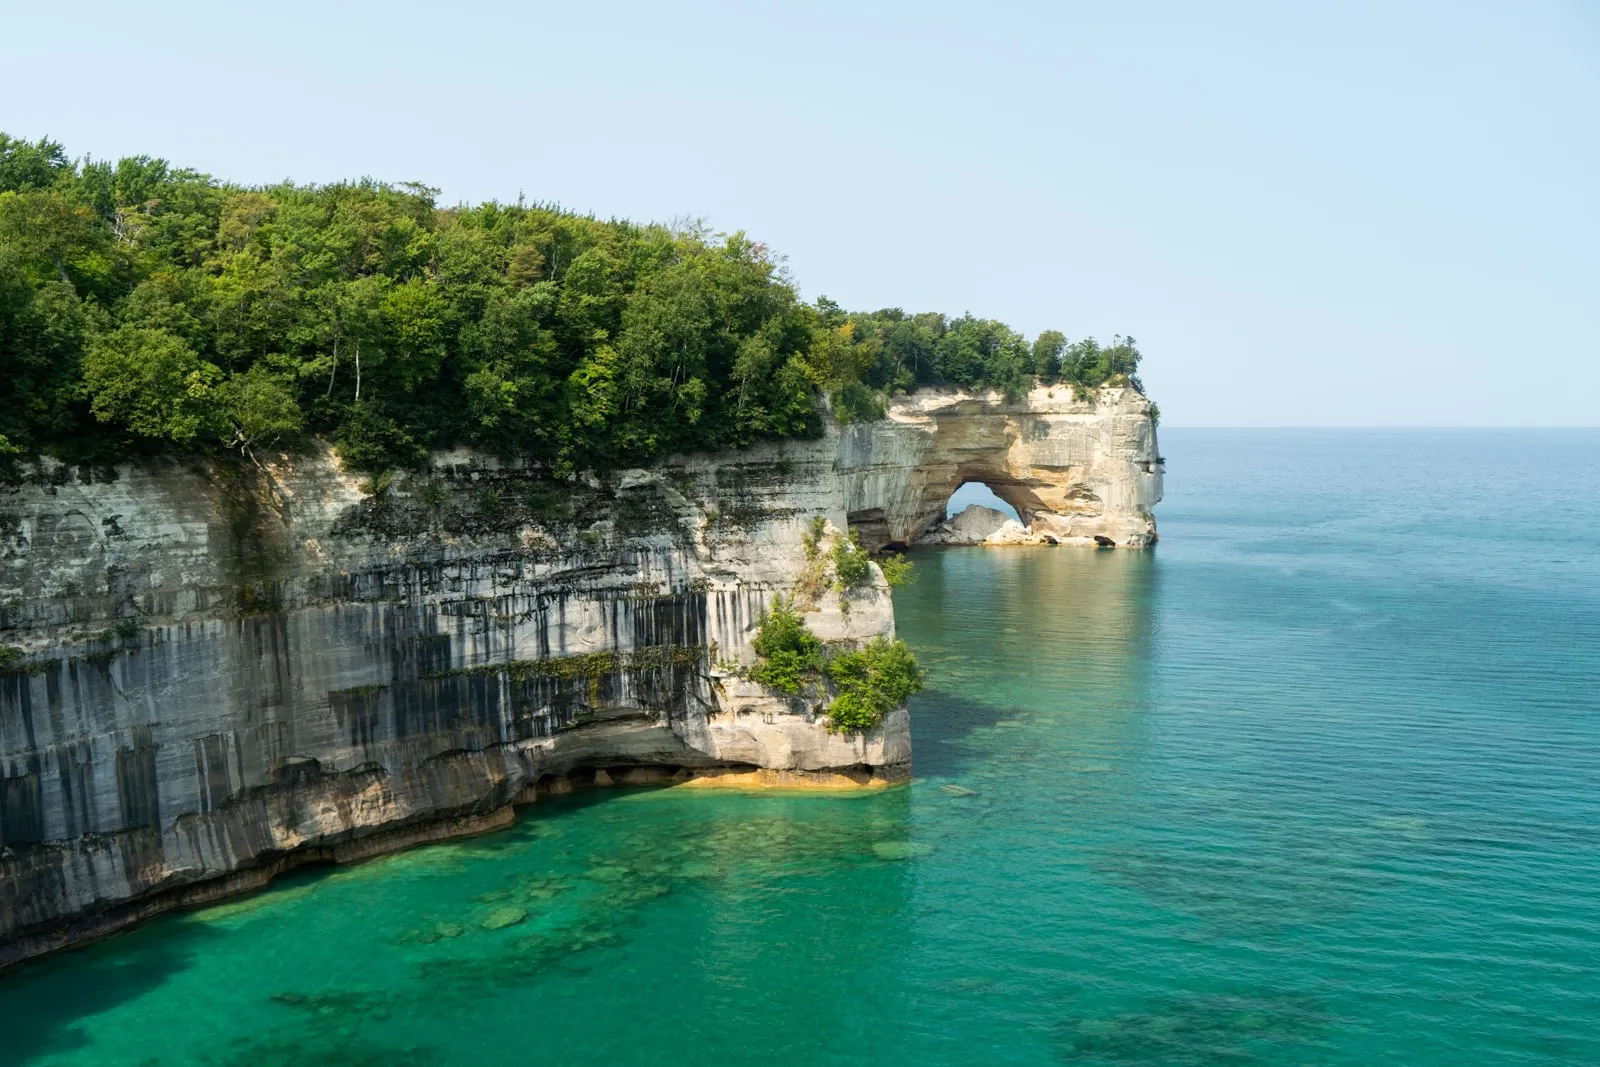 Hiking the Chapel Loop Trail at Pictured Rocks National Lakeshore